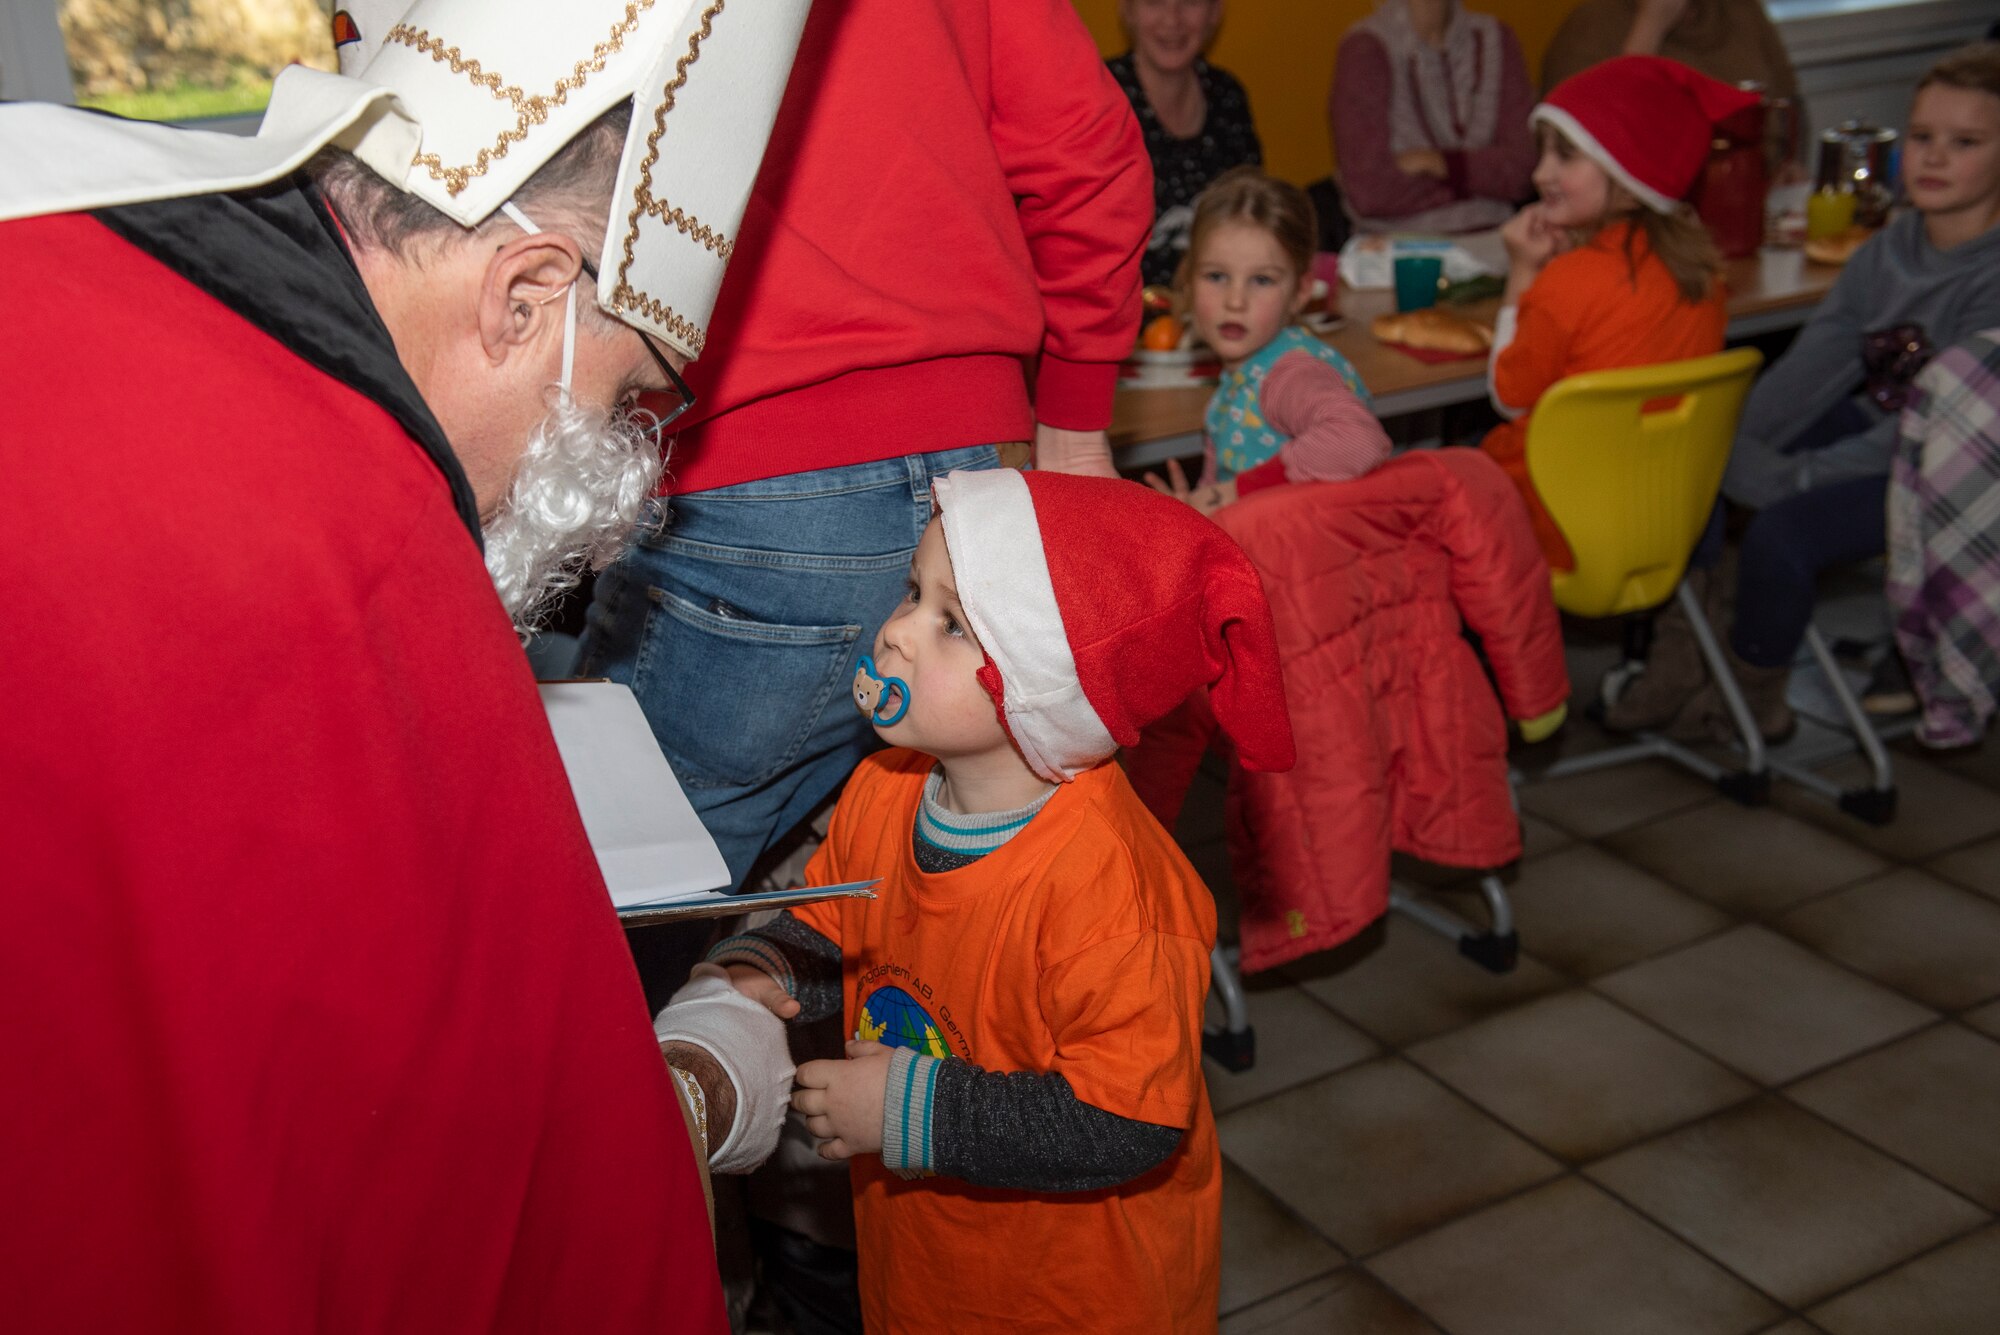 A kindergarten student greets St. Nikolaus at St. Martin's Special Children's School in Bitburg, Germany, Dec. 5, 2019. St. Nikolaus paid a visit to the students of St. Martin's School and let them know he was watching over their good deeds. (U.S. Air Force photo by Airman 1st Class Alison Stewart)